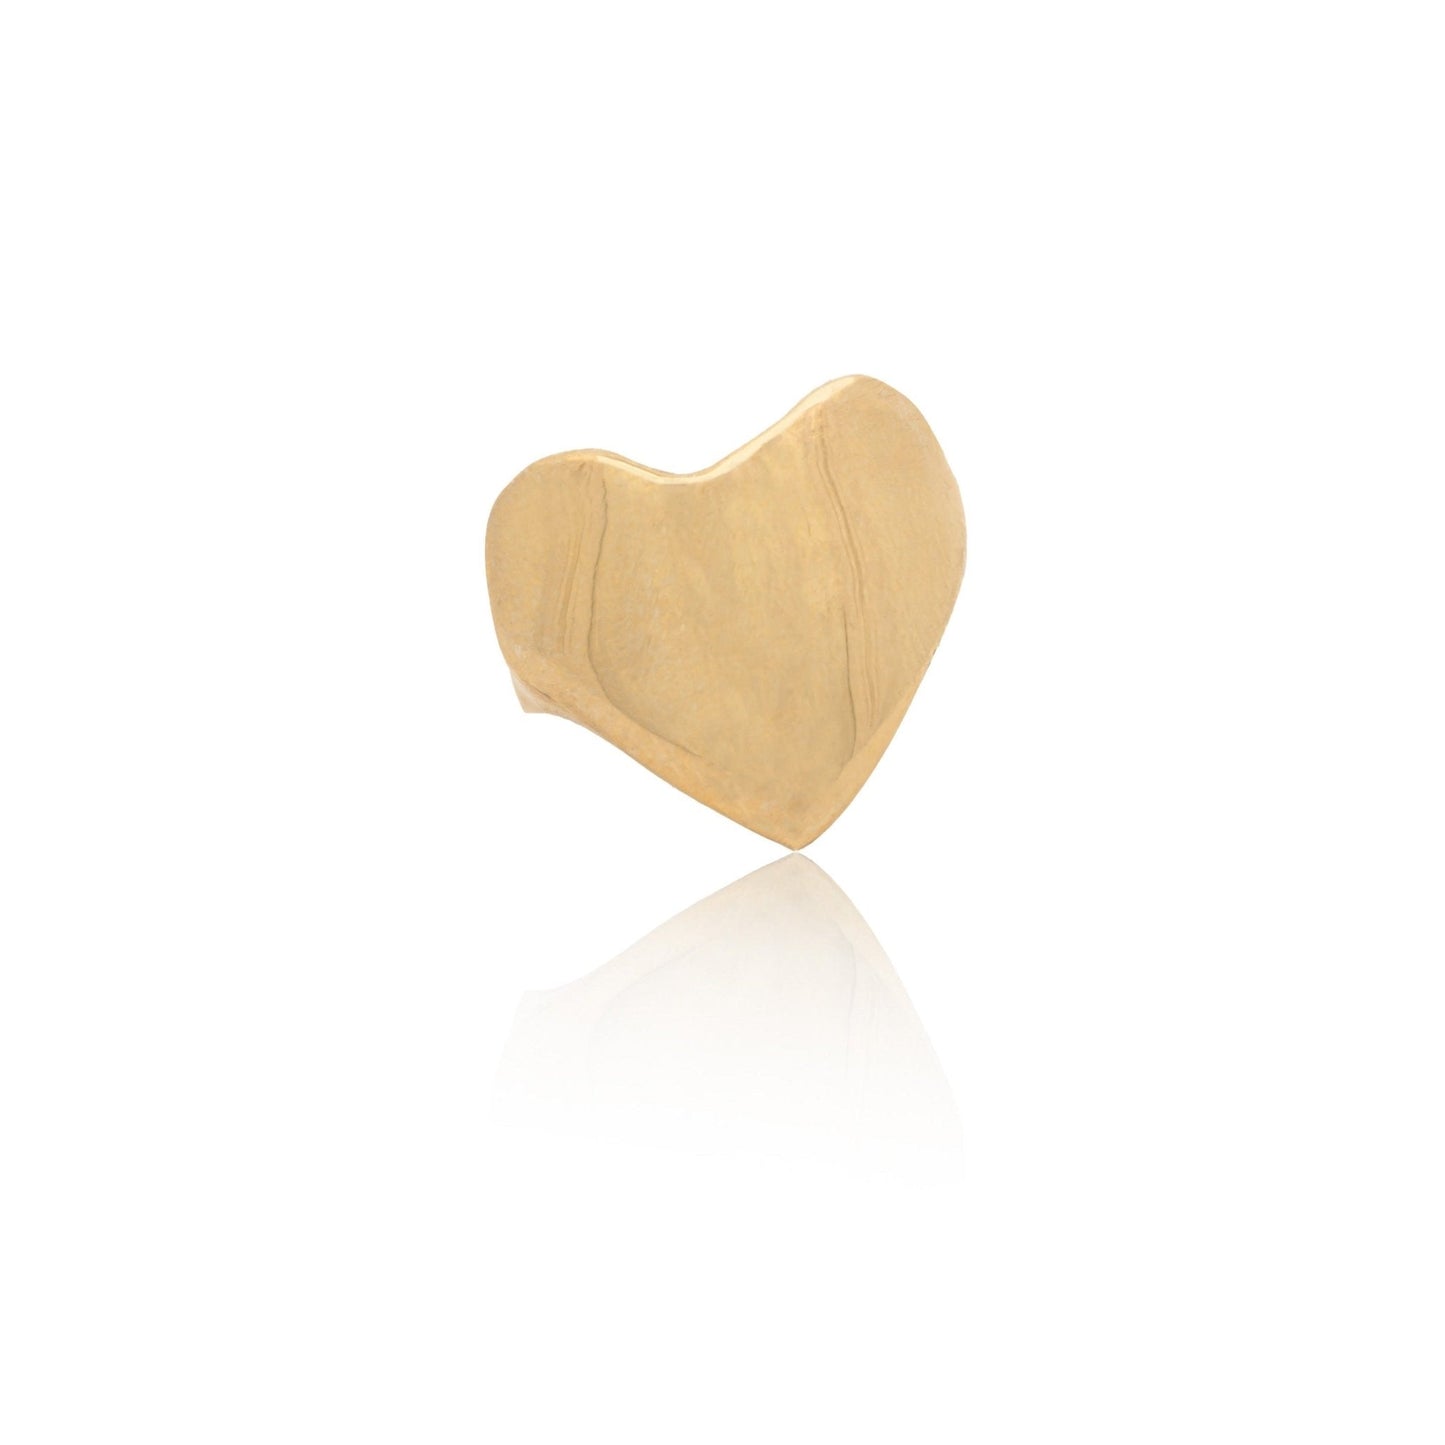 Crafted from an original wax sculpture, this chunky heart signet is named for the Greek god of love. Serves as a gentle reminder to love yourself. Cast in recycled brass or sterling silver for a luxurious finish. Designed & handmade in Los Angeles.